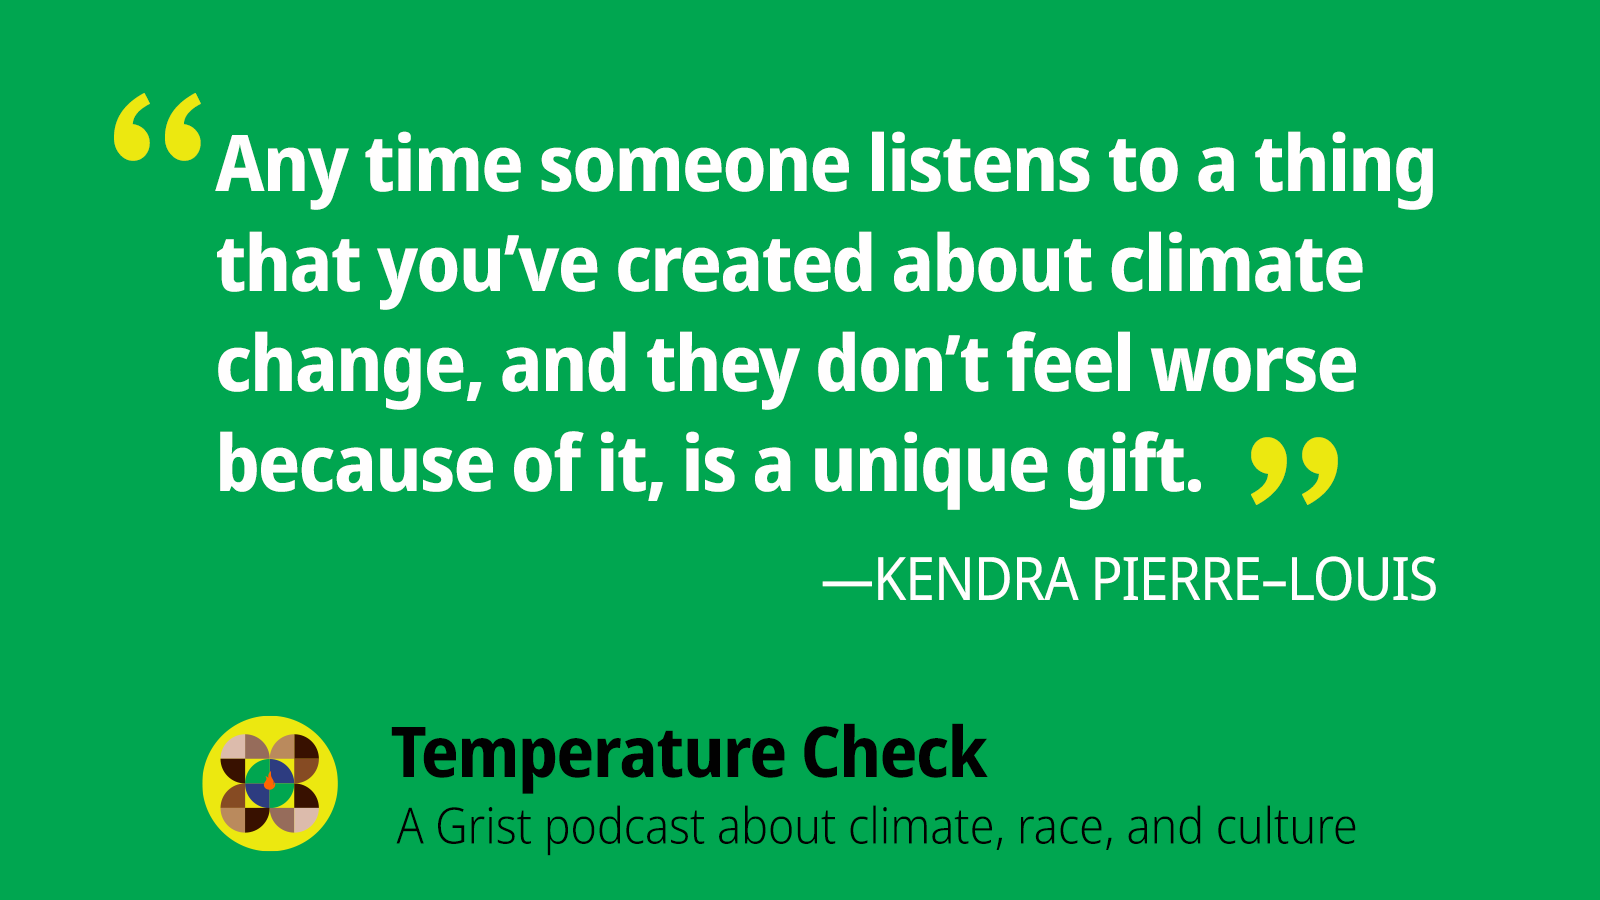 Race Against Climate Change podcast